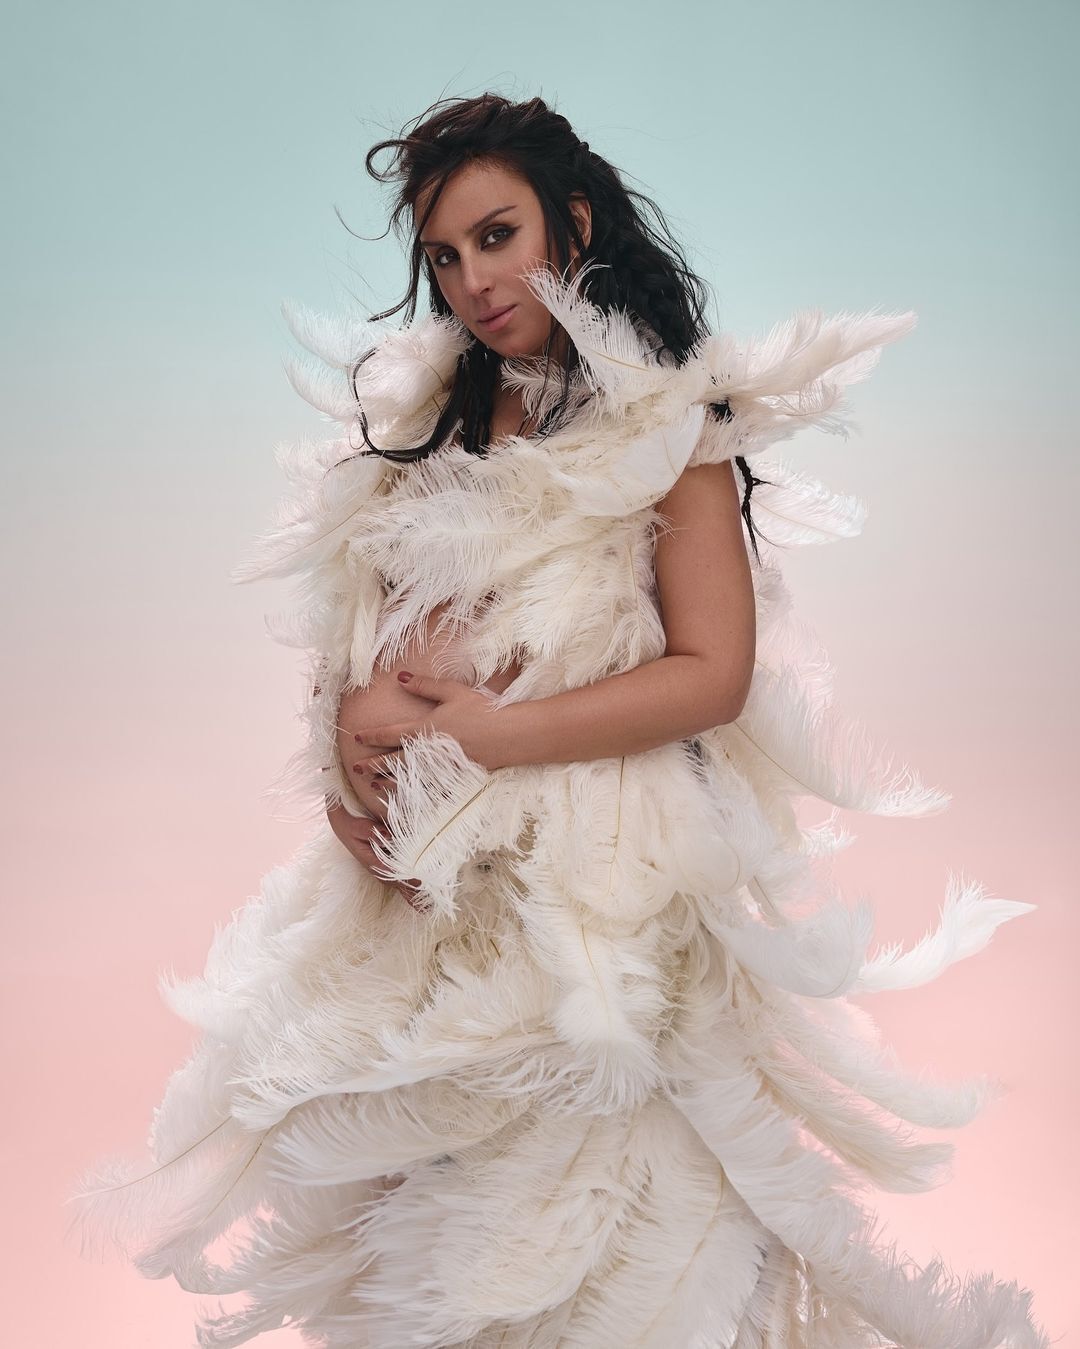 Jamala became a mother for the third time and showed a tender photo of her son